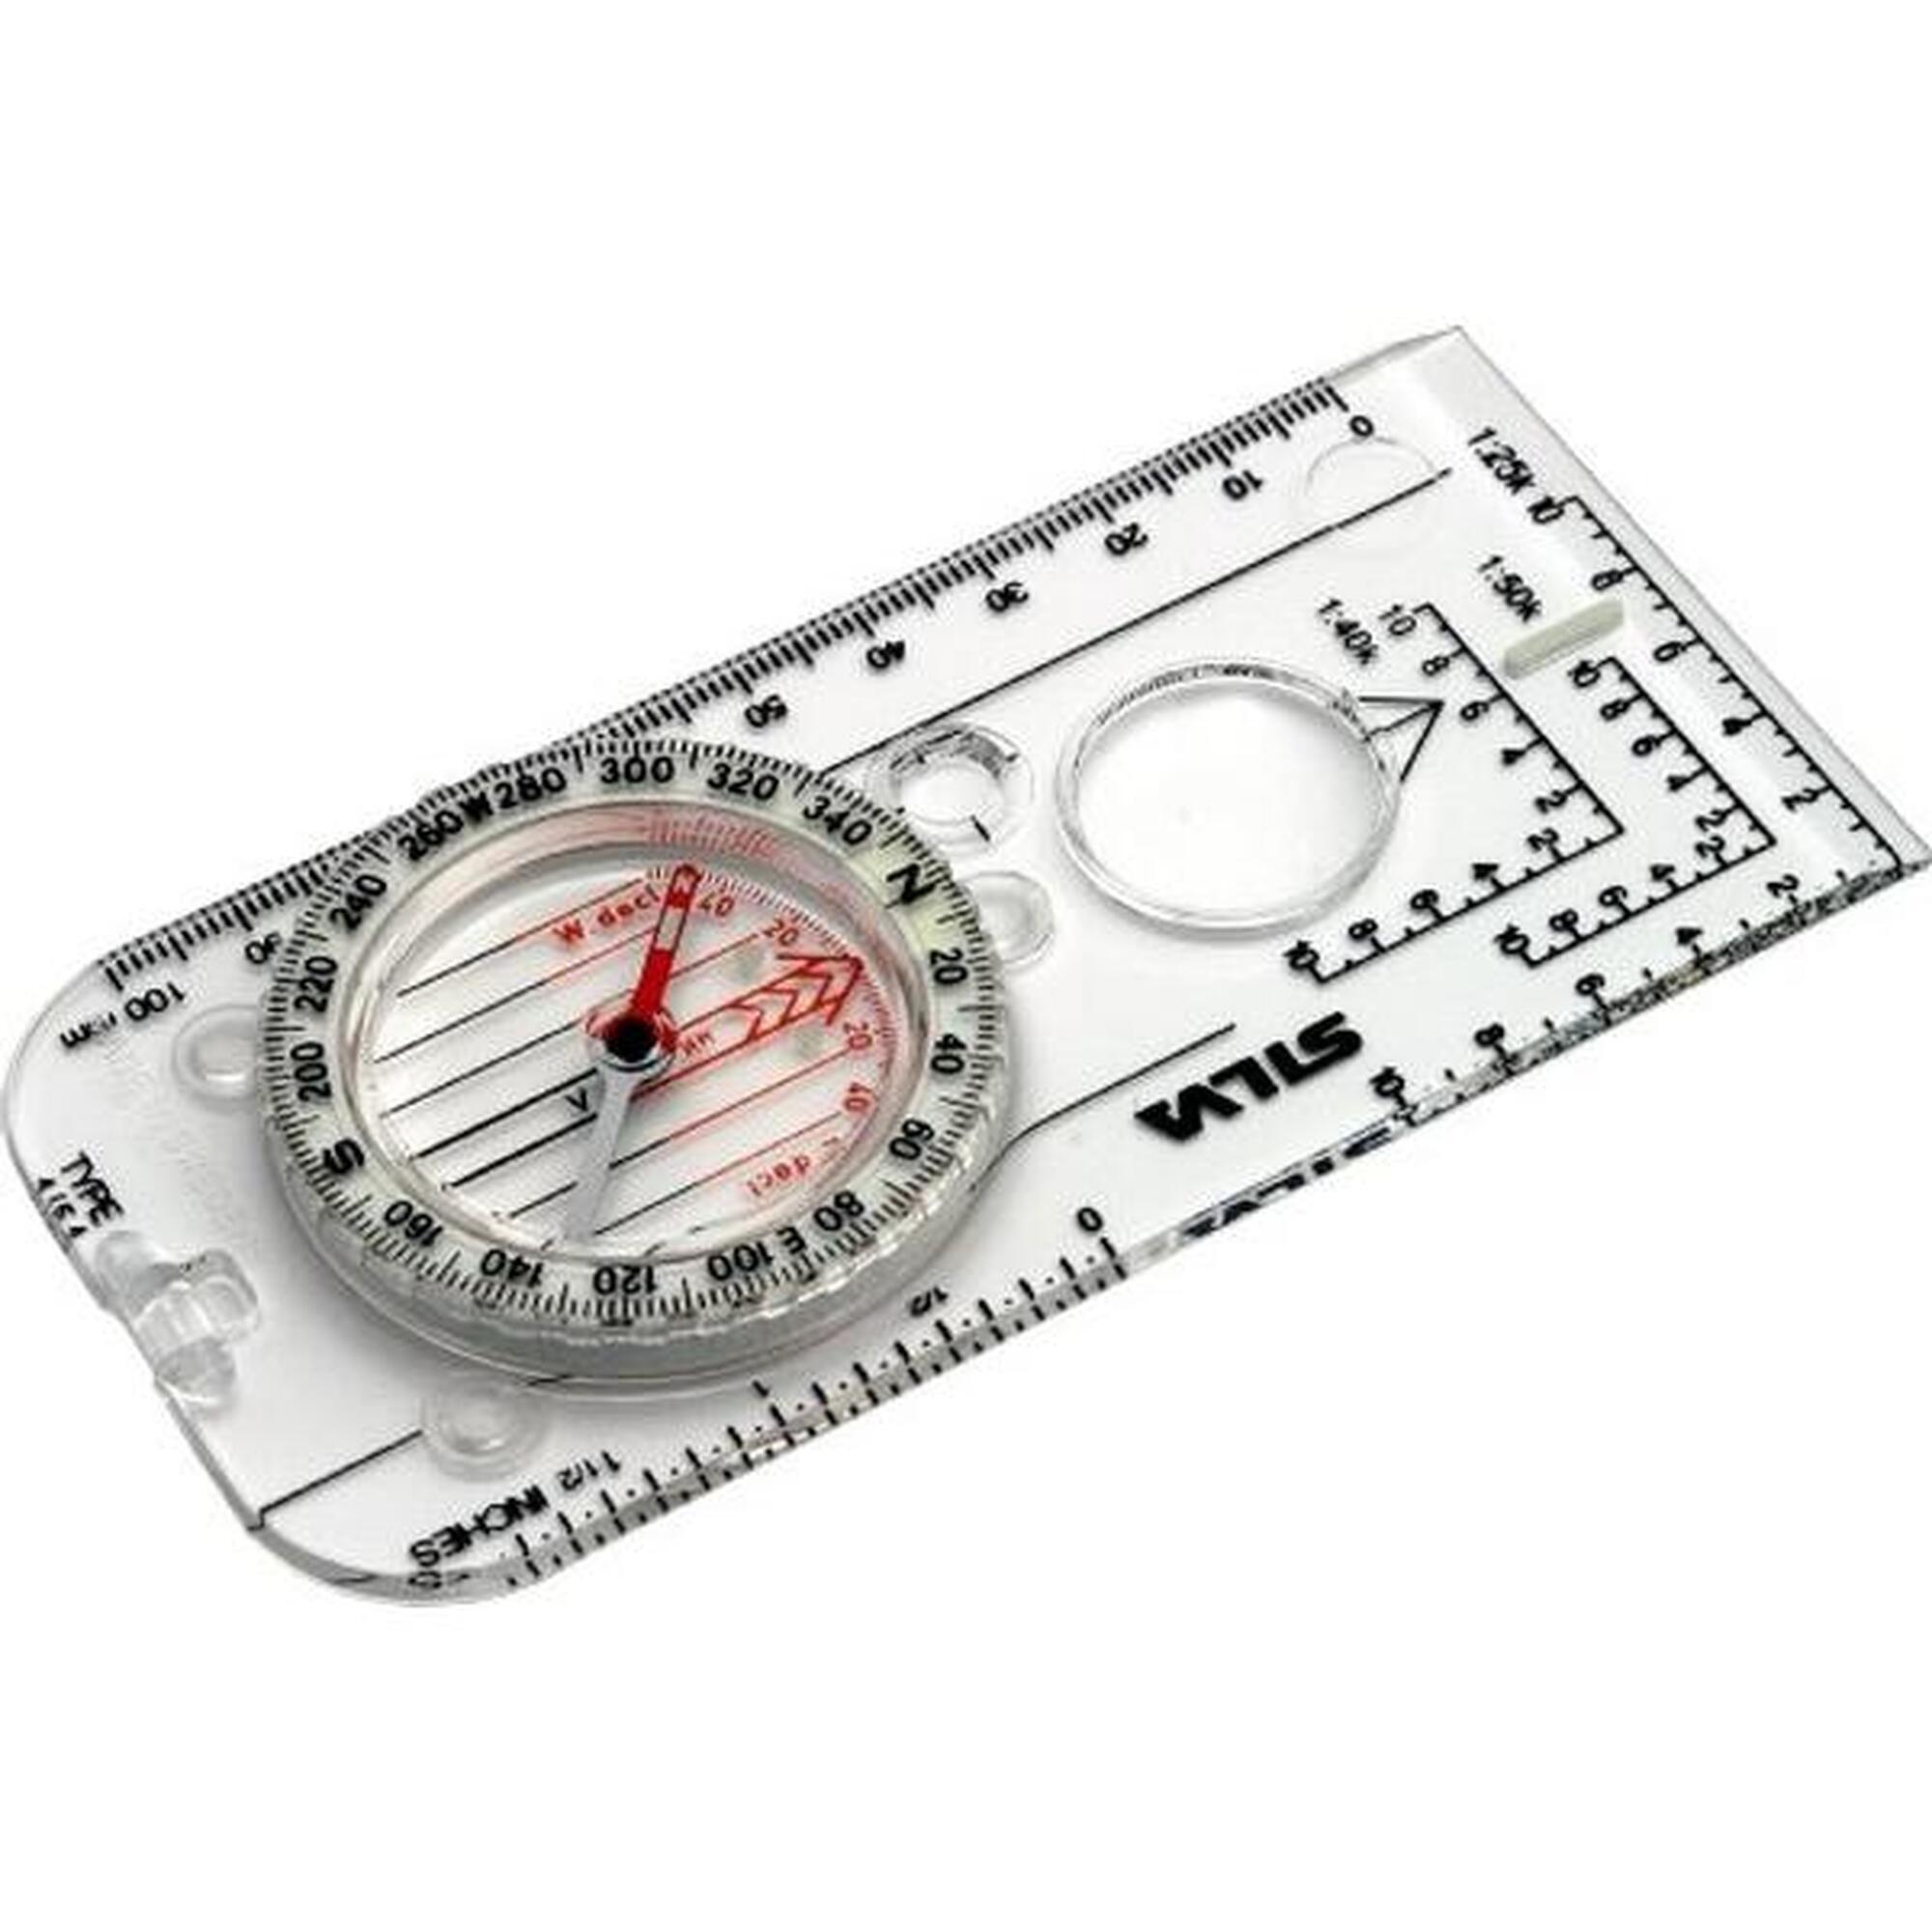 Silva Expedition 4 Base Plate Compass - 360 1/1